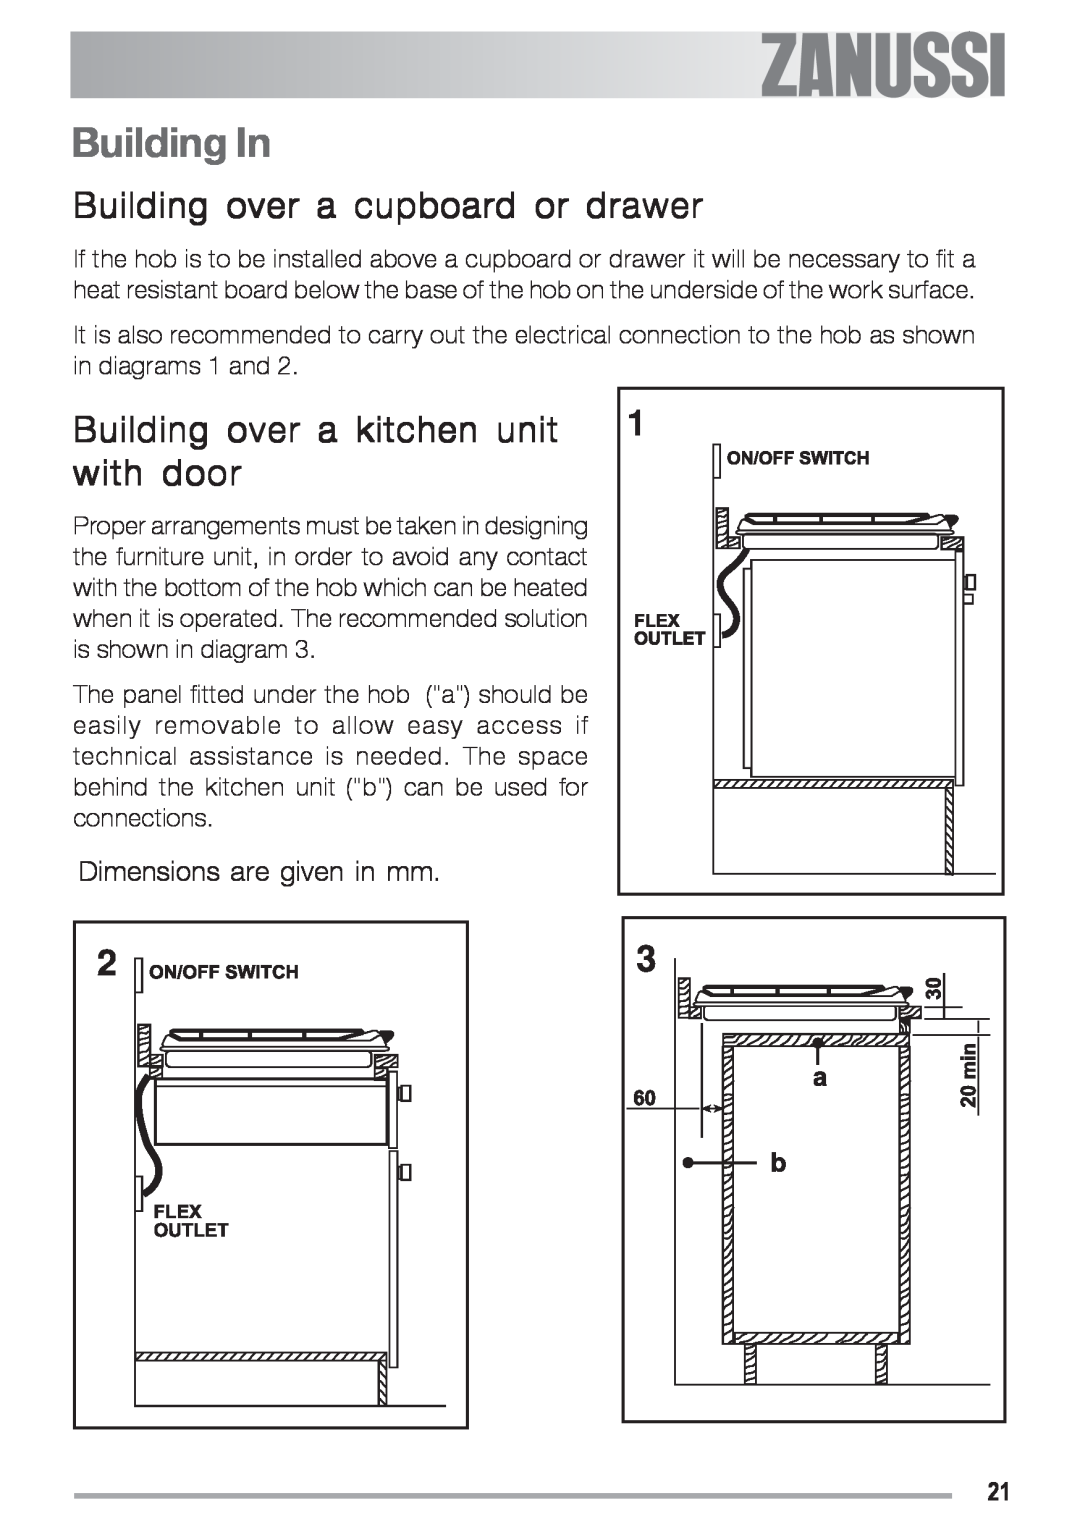 Zanussi ZGS 682 ICT manual Building In, Building over a cupboard or drawer, Building over a kitchen unit with door 